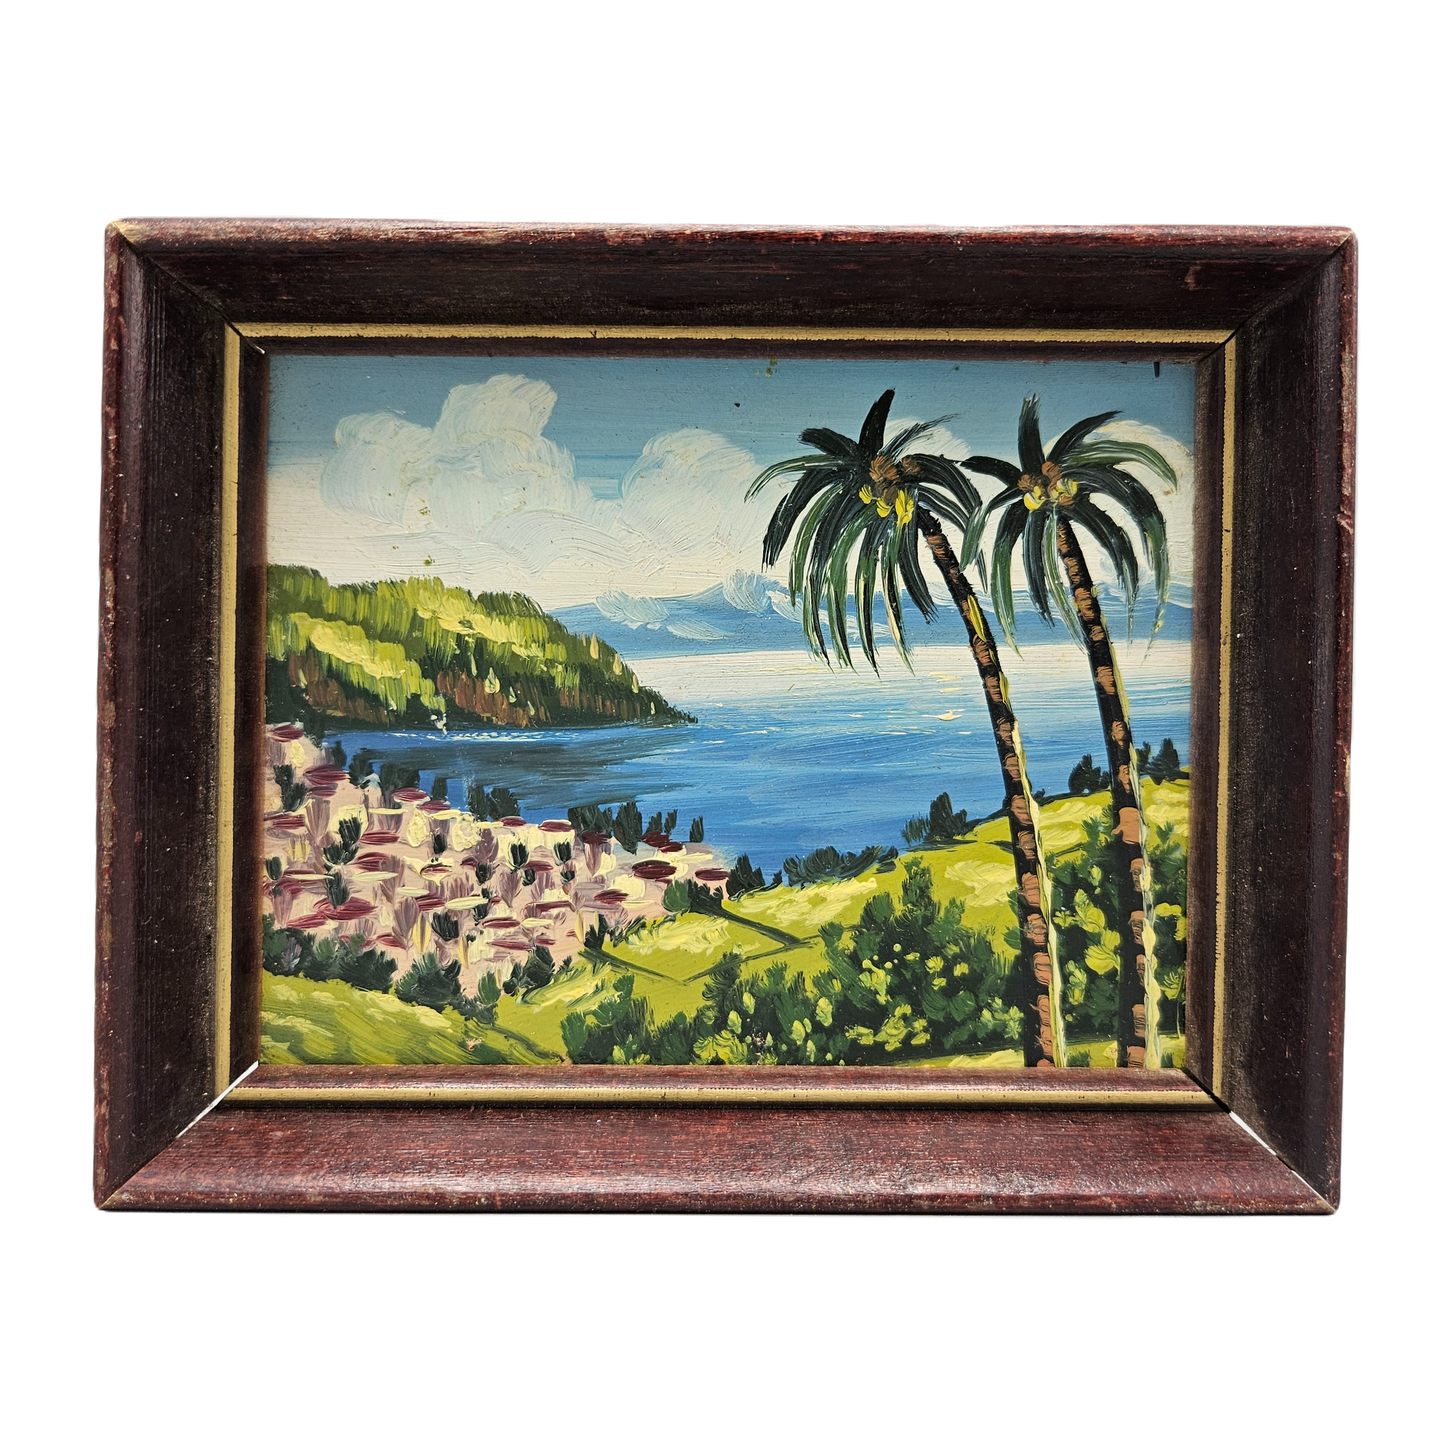 Vintage Small Miniature Oil on Board Painting of Tropical Scene in Wooden Frame